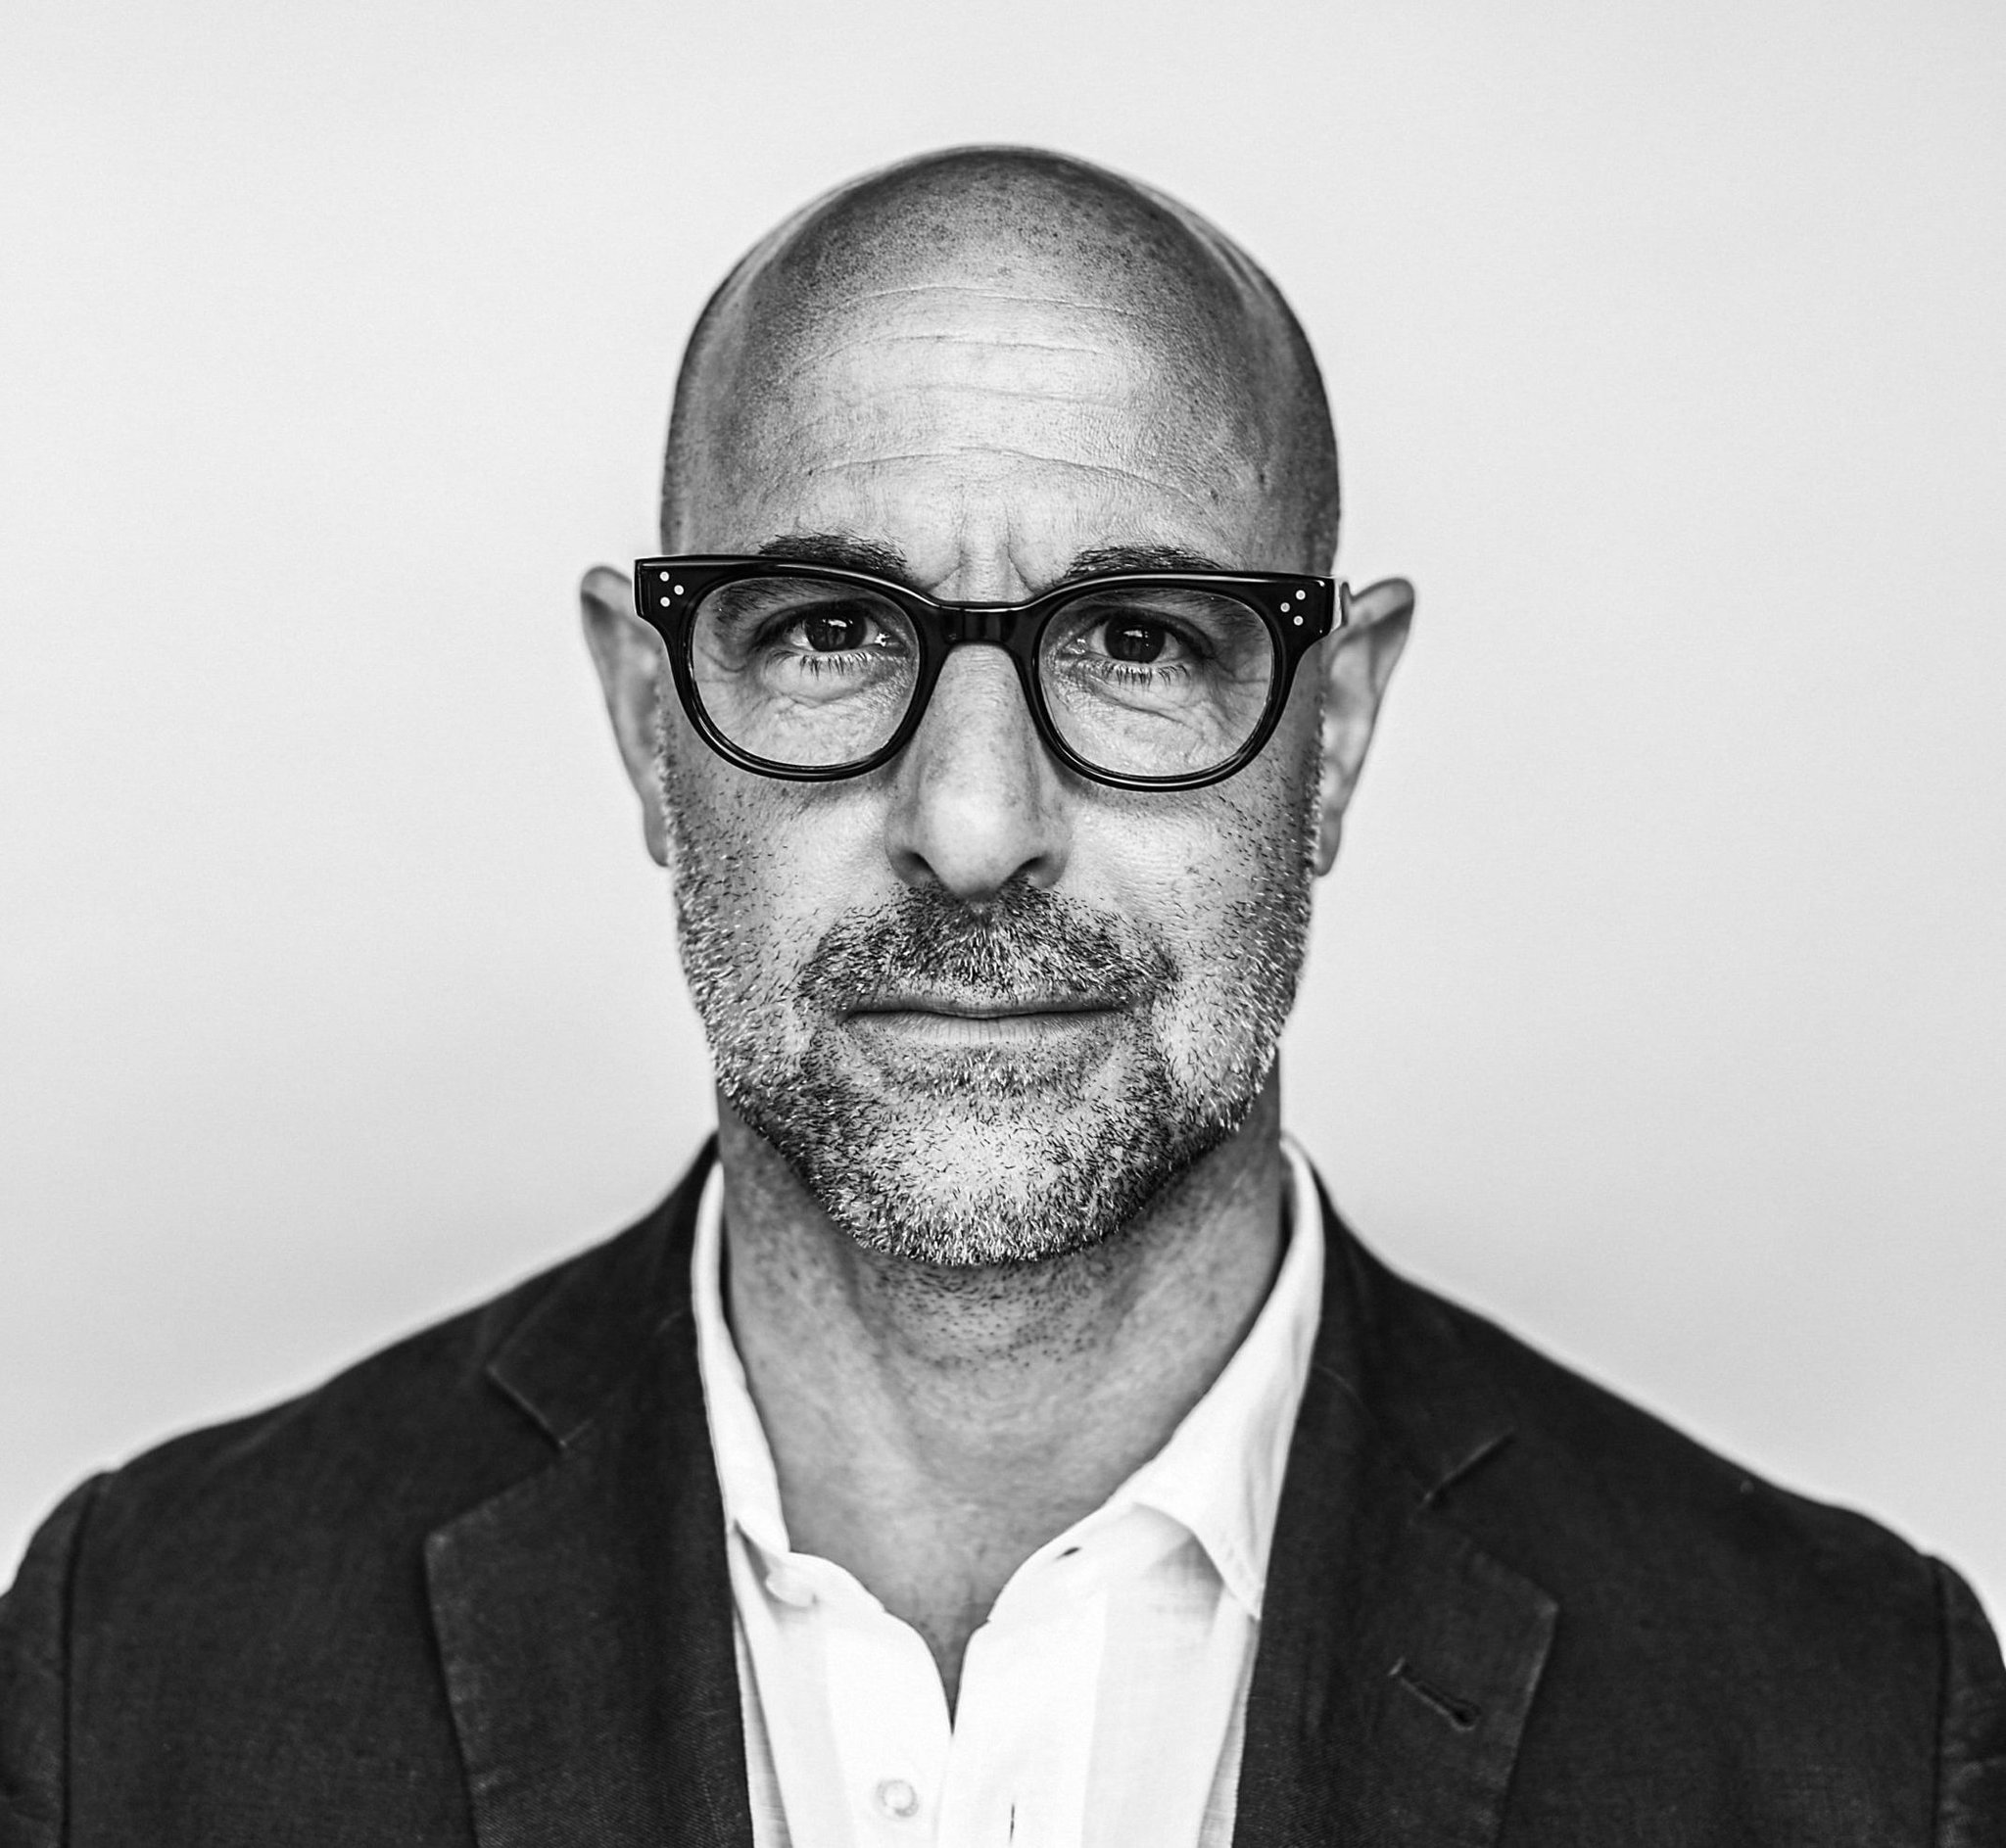 Heartthrob thespian,
Negroni connoisseur,
Renaissance man.

Happy birthday to the prolific, Stanley Tucci. 